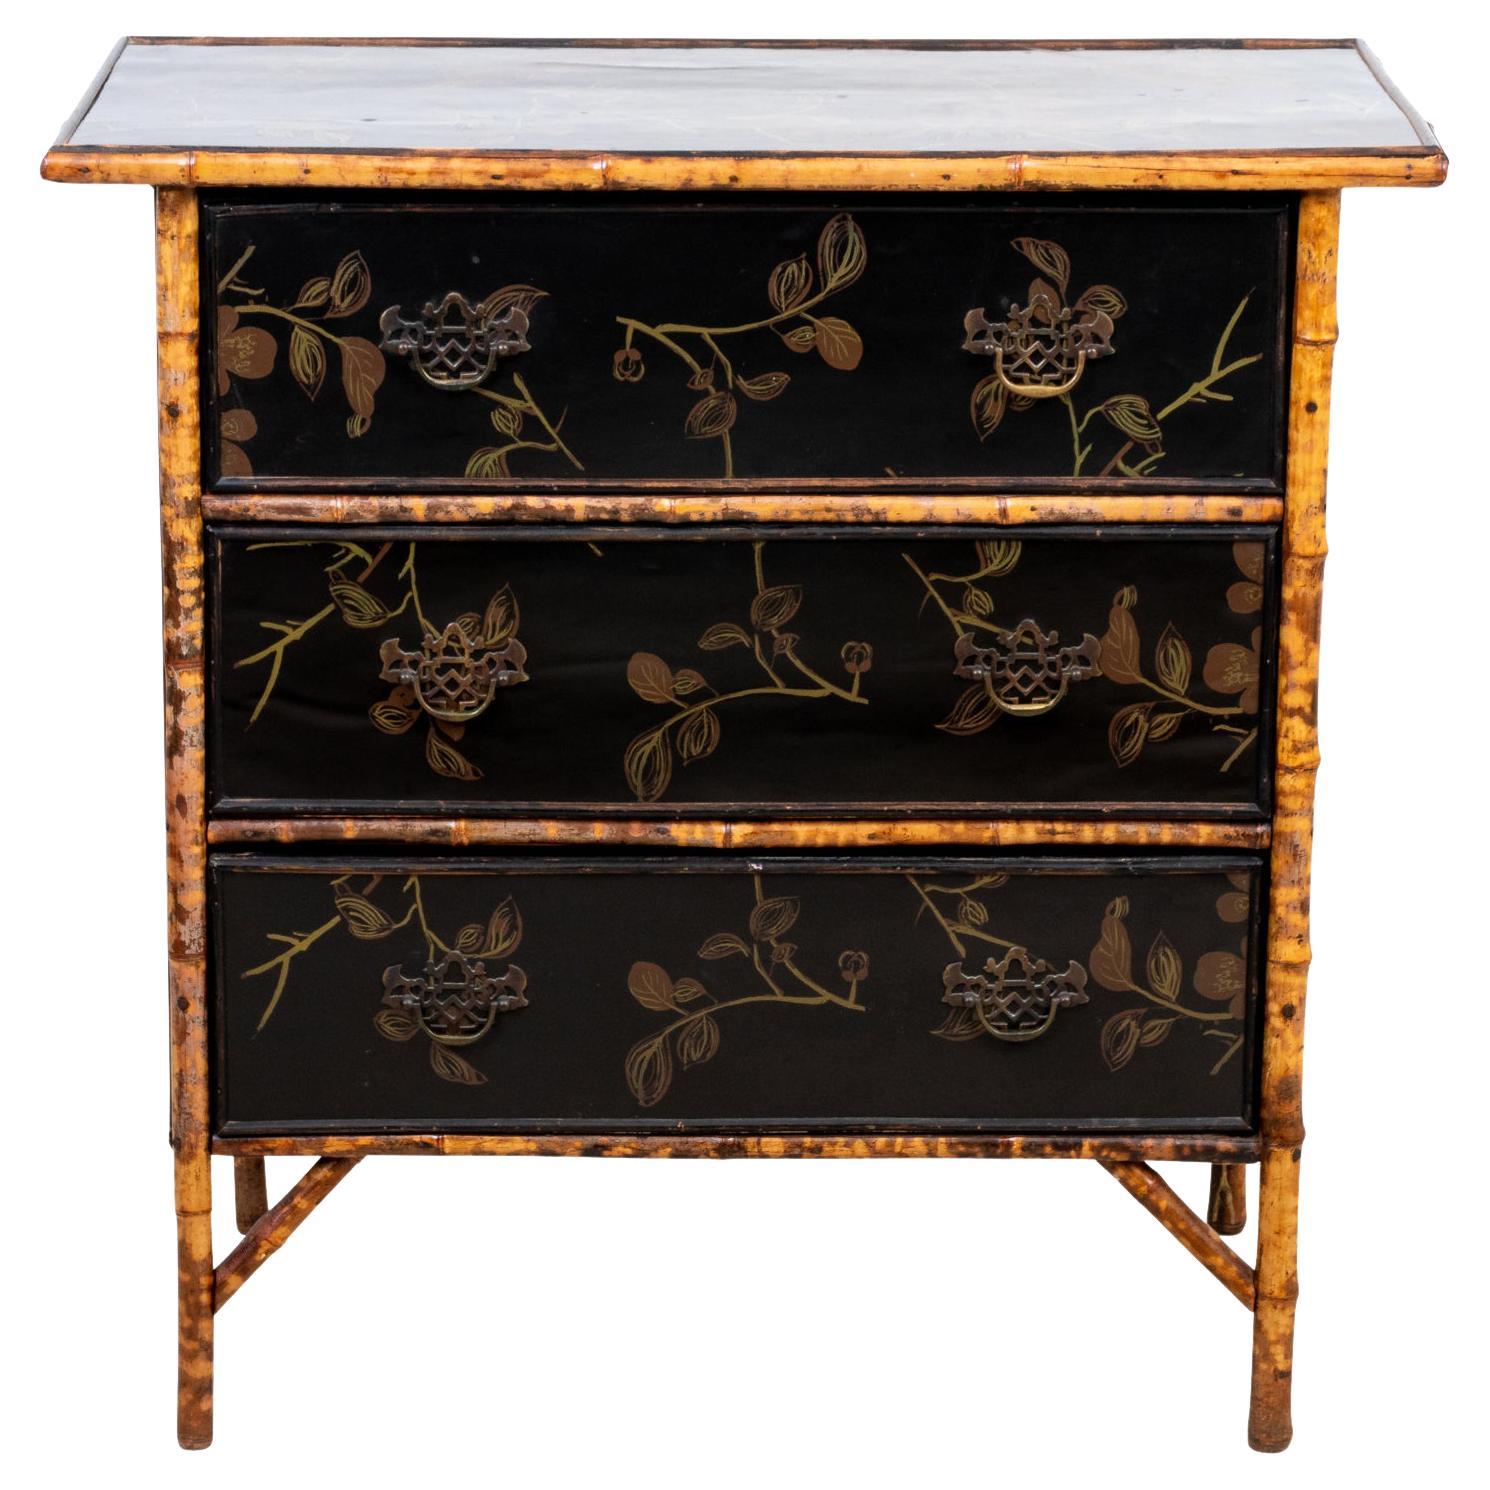 English Lacquered Bamboo Chest of Drawers